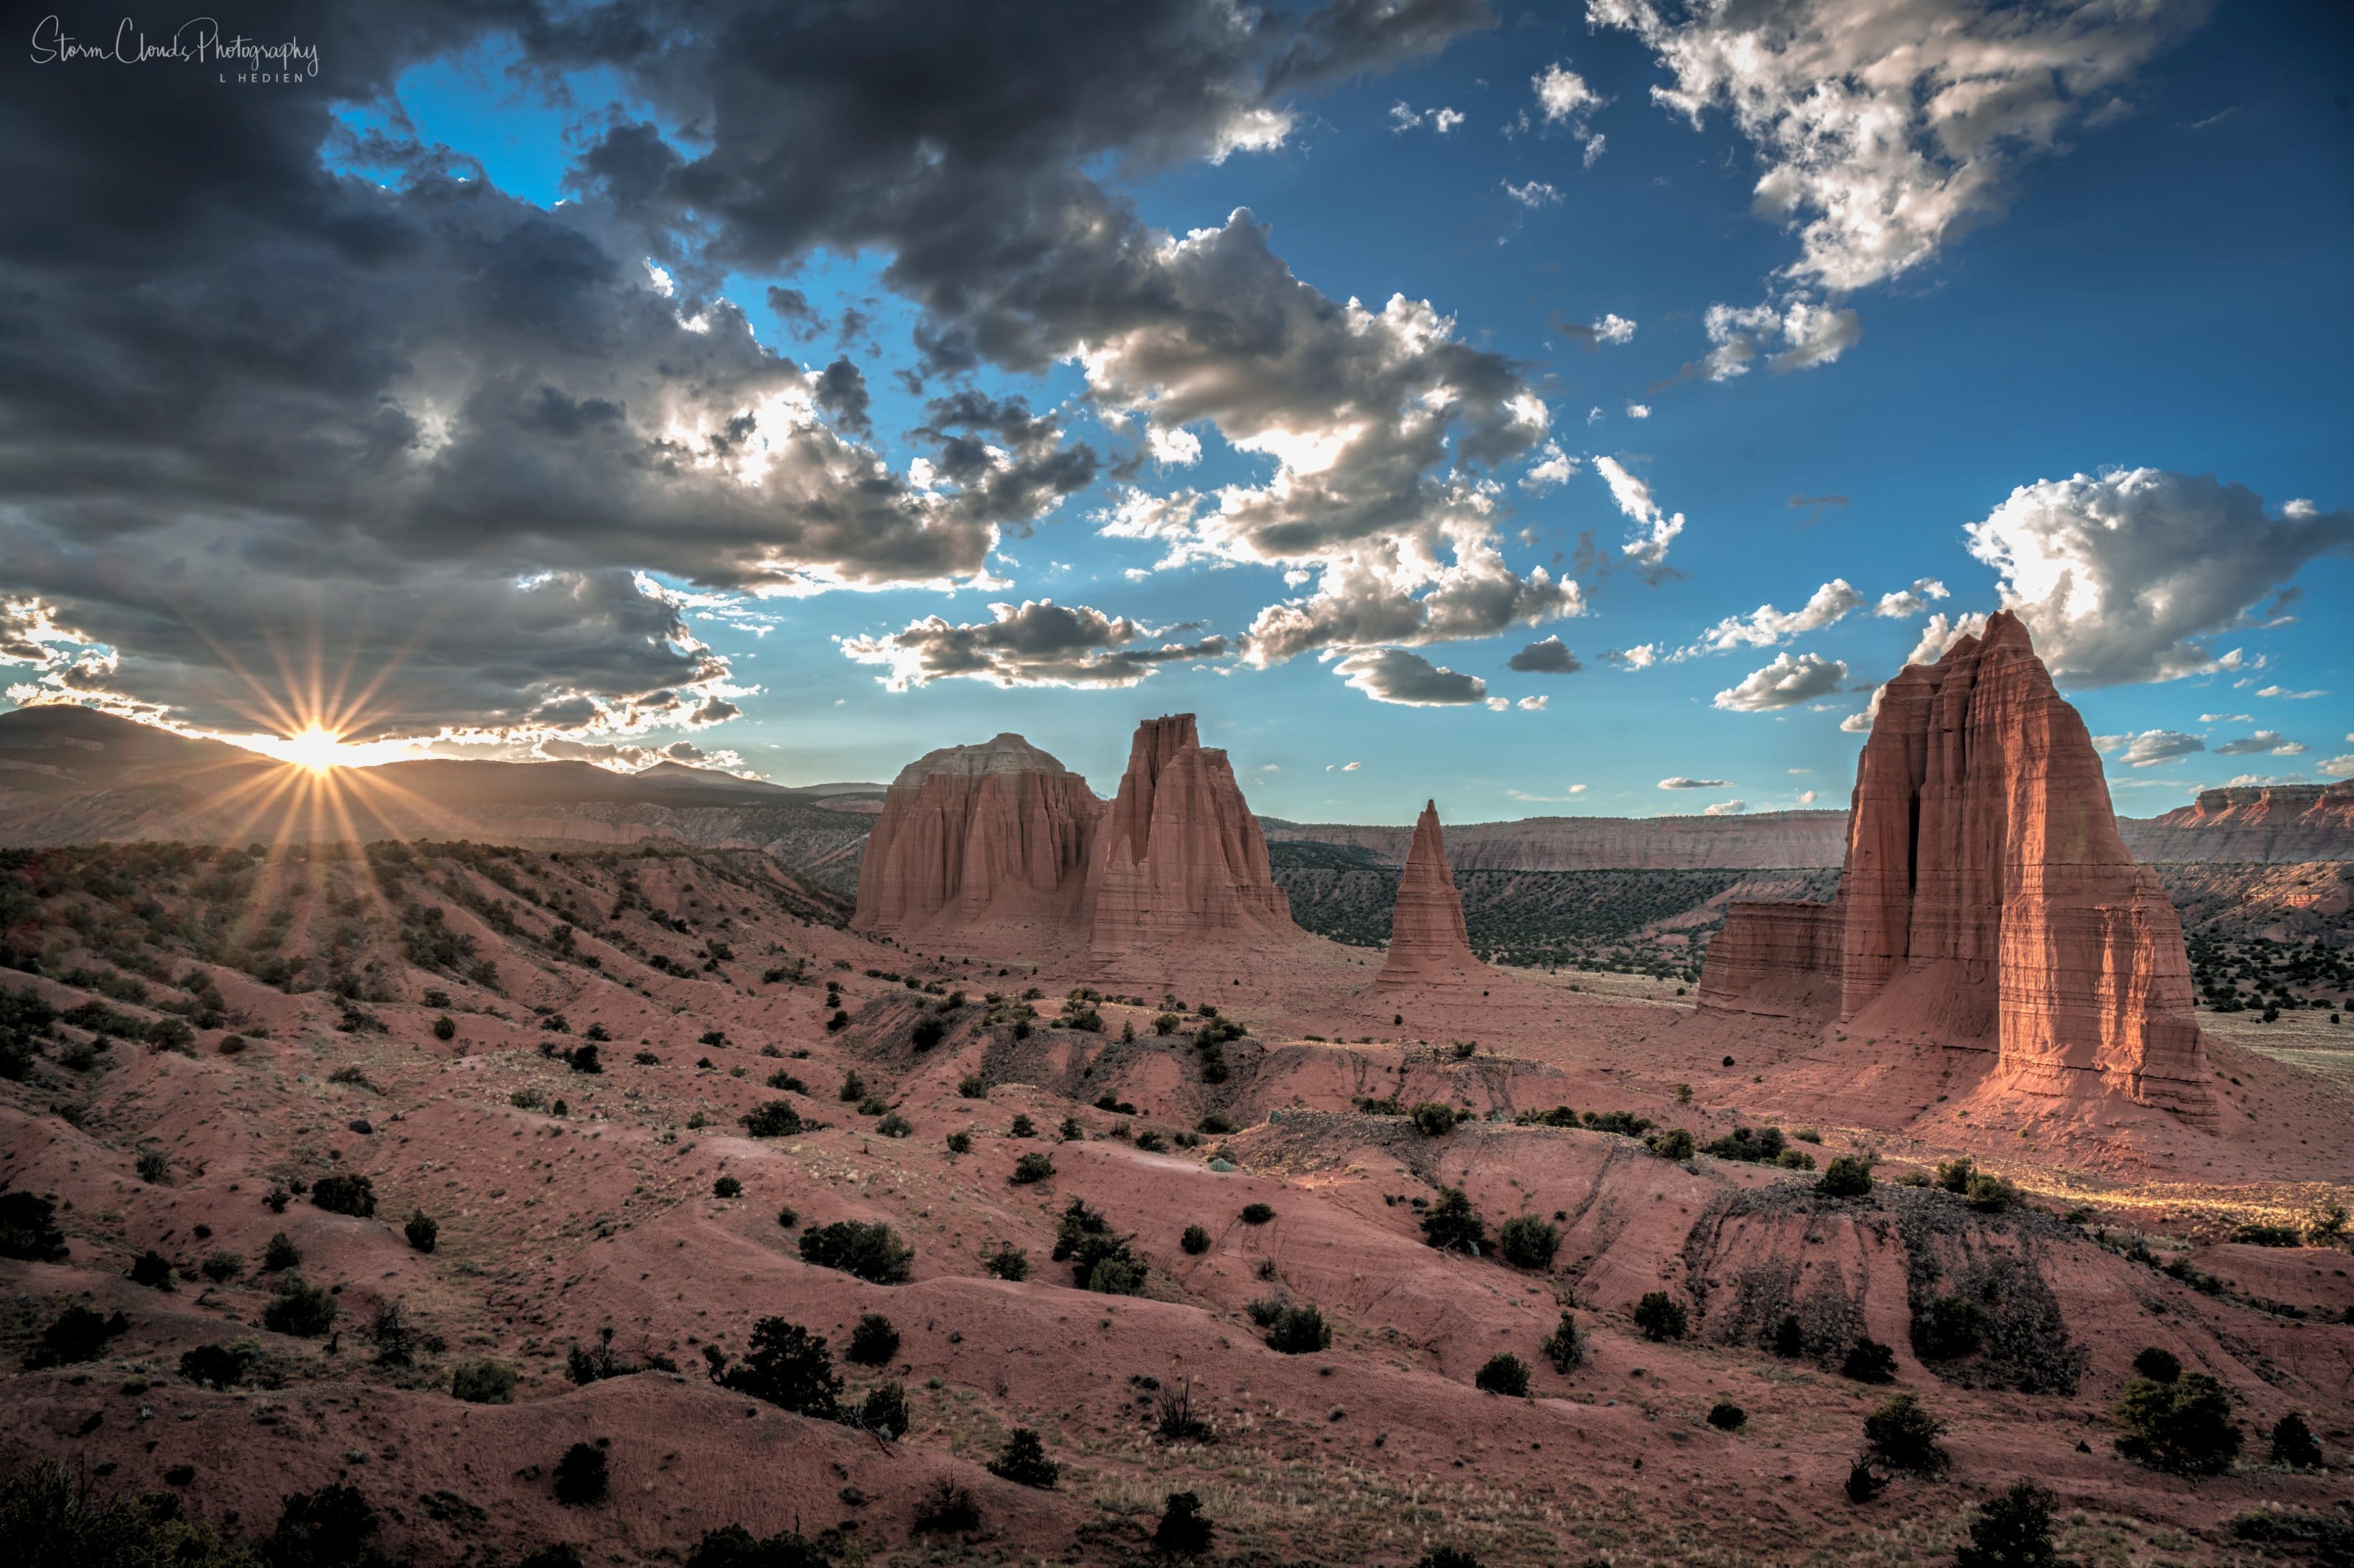 2nd Place Cathedral Valley in Capitol Reef Utah at sunset by Laura Hedien @lhedien